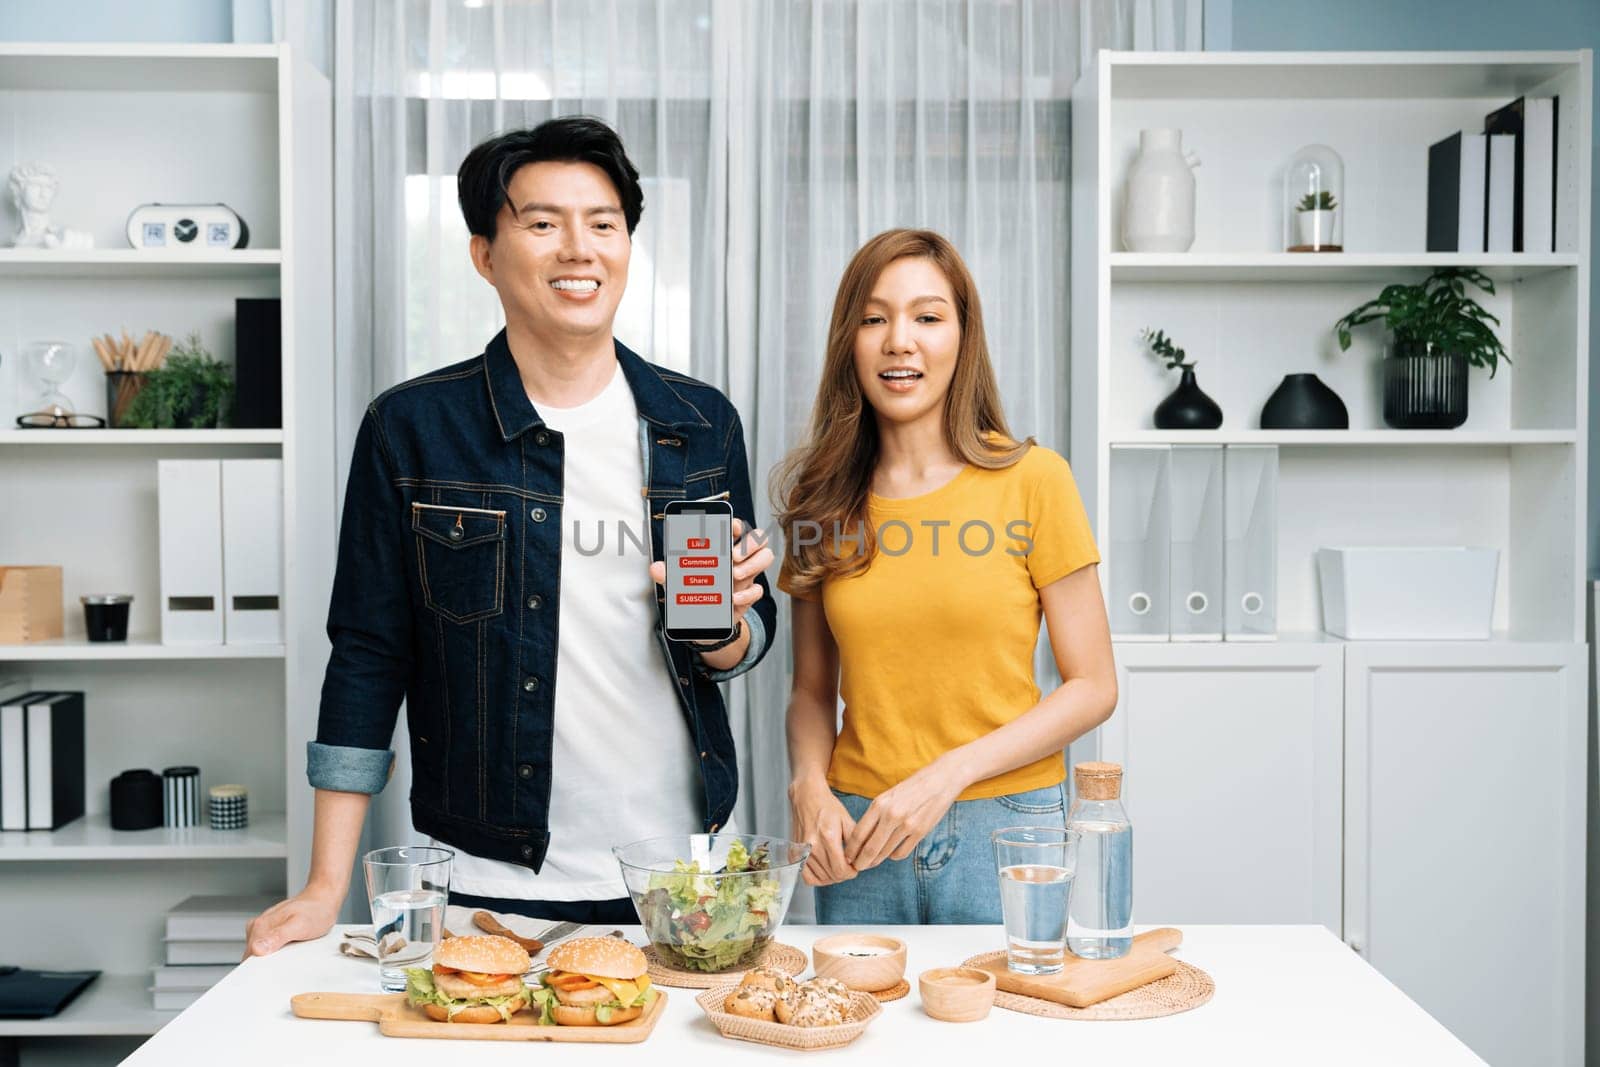 Chef influencers reading comment on phone for answering time on social media cooking show channel live streaming menu dish mixed salad, bun bread wholegrain and hamburger easy menu at home. Infobahn.